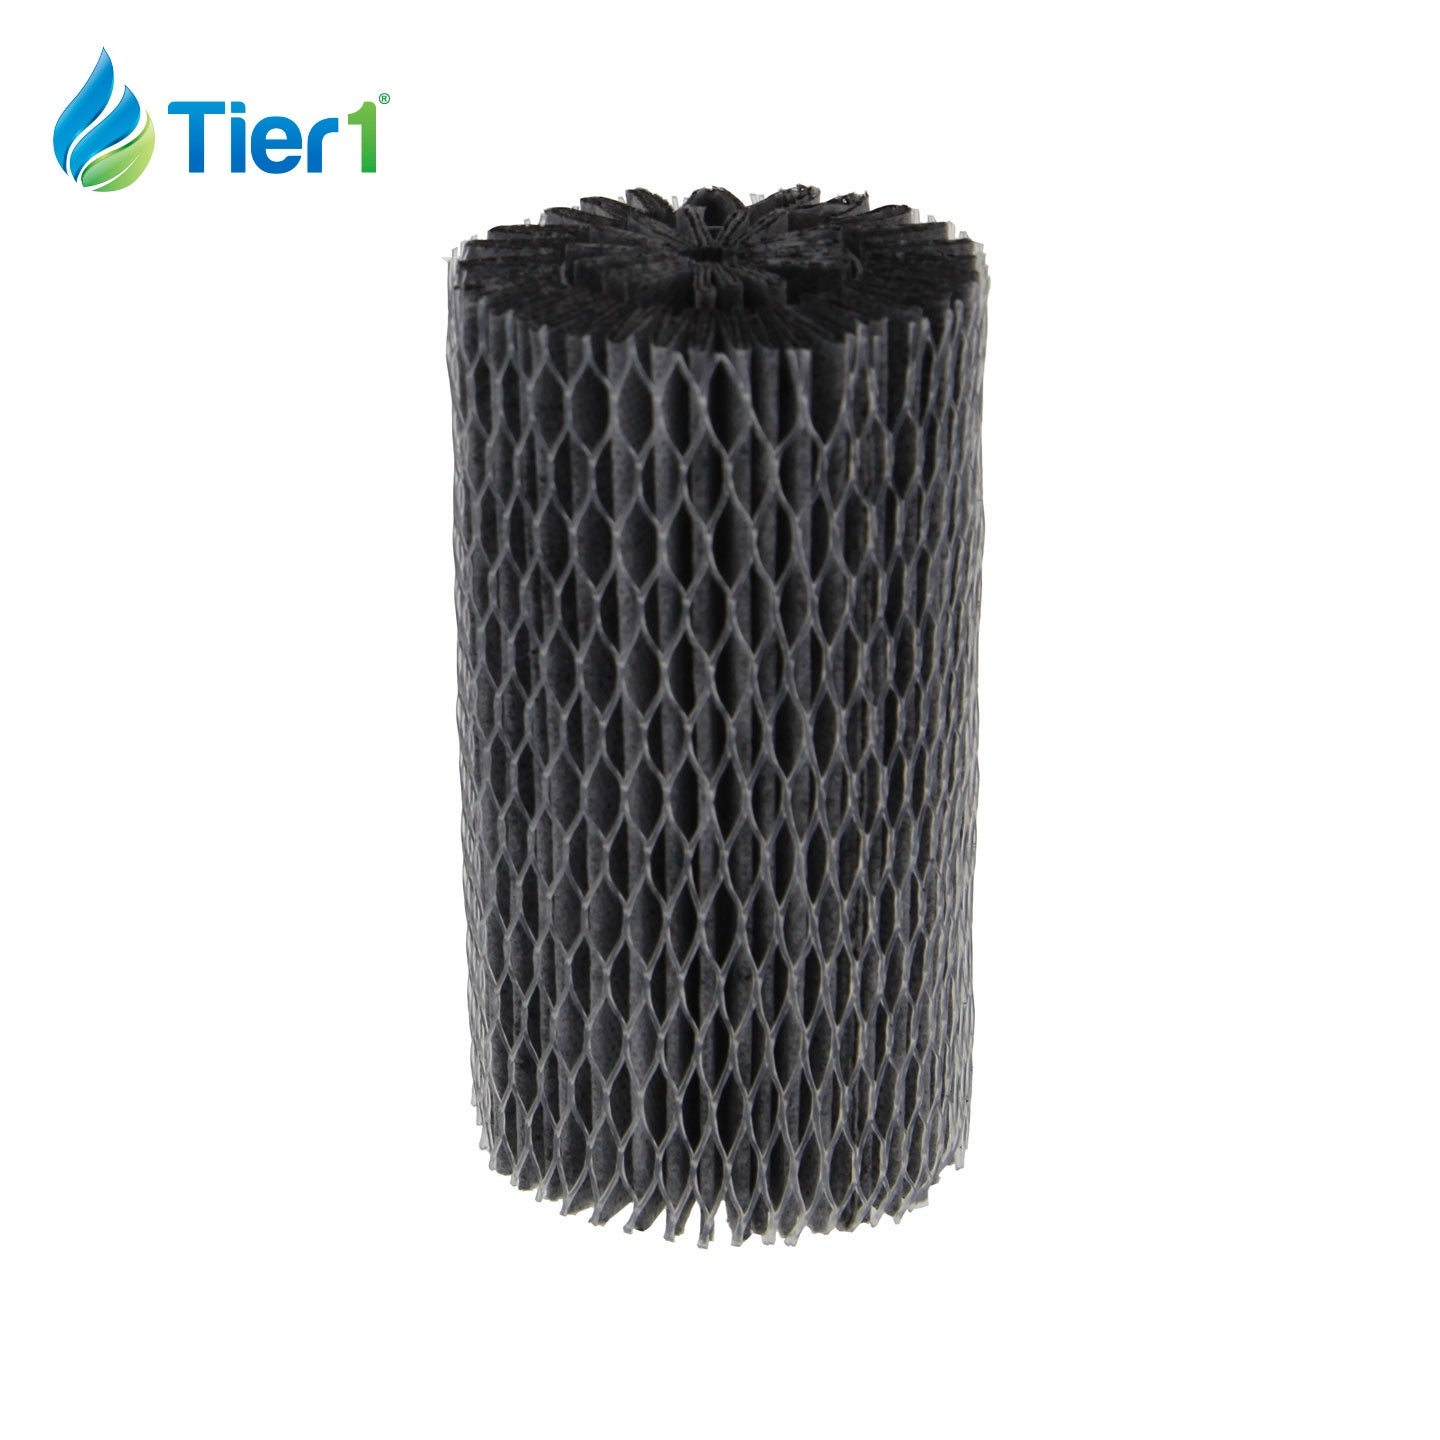 Tier1 Electrolux PureAdvantage Refrigerator Air Filter Replacement Comparable